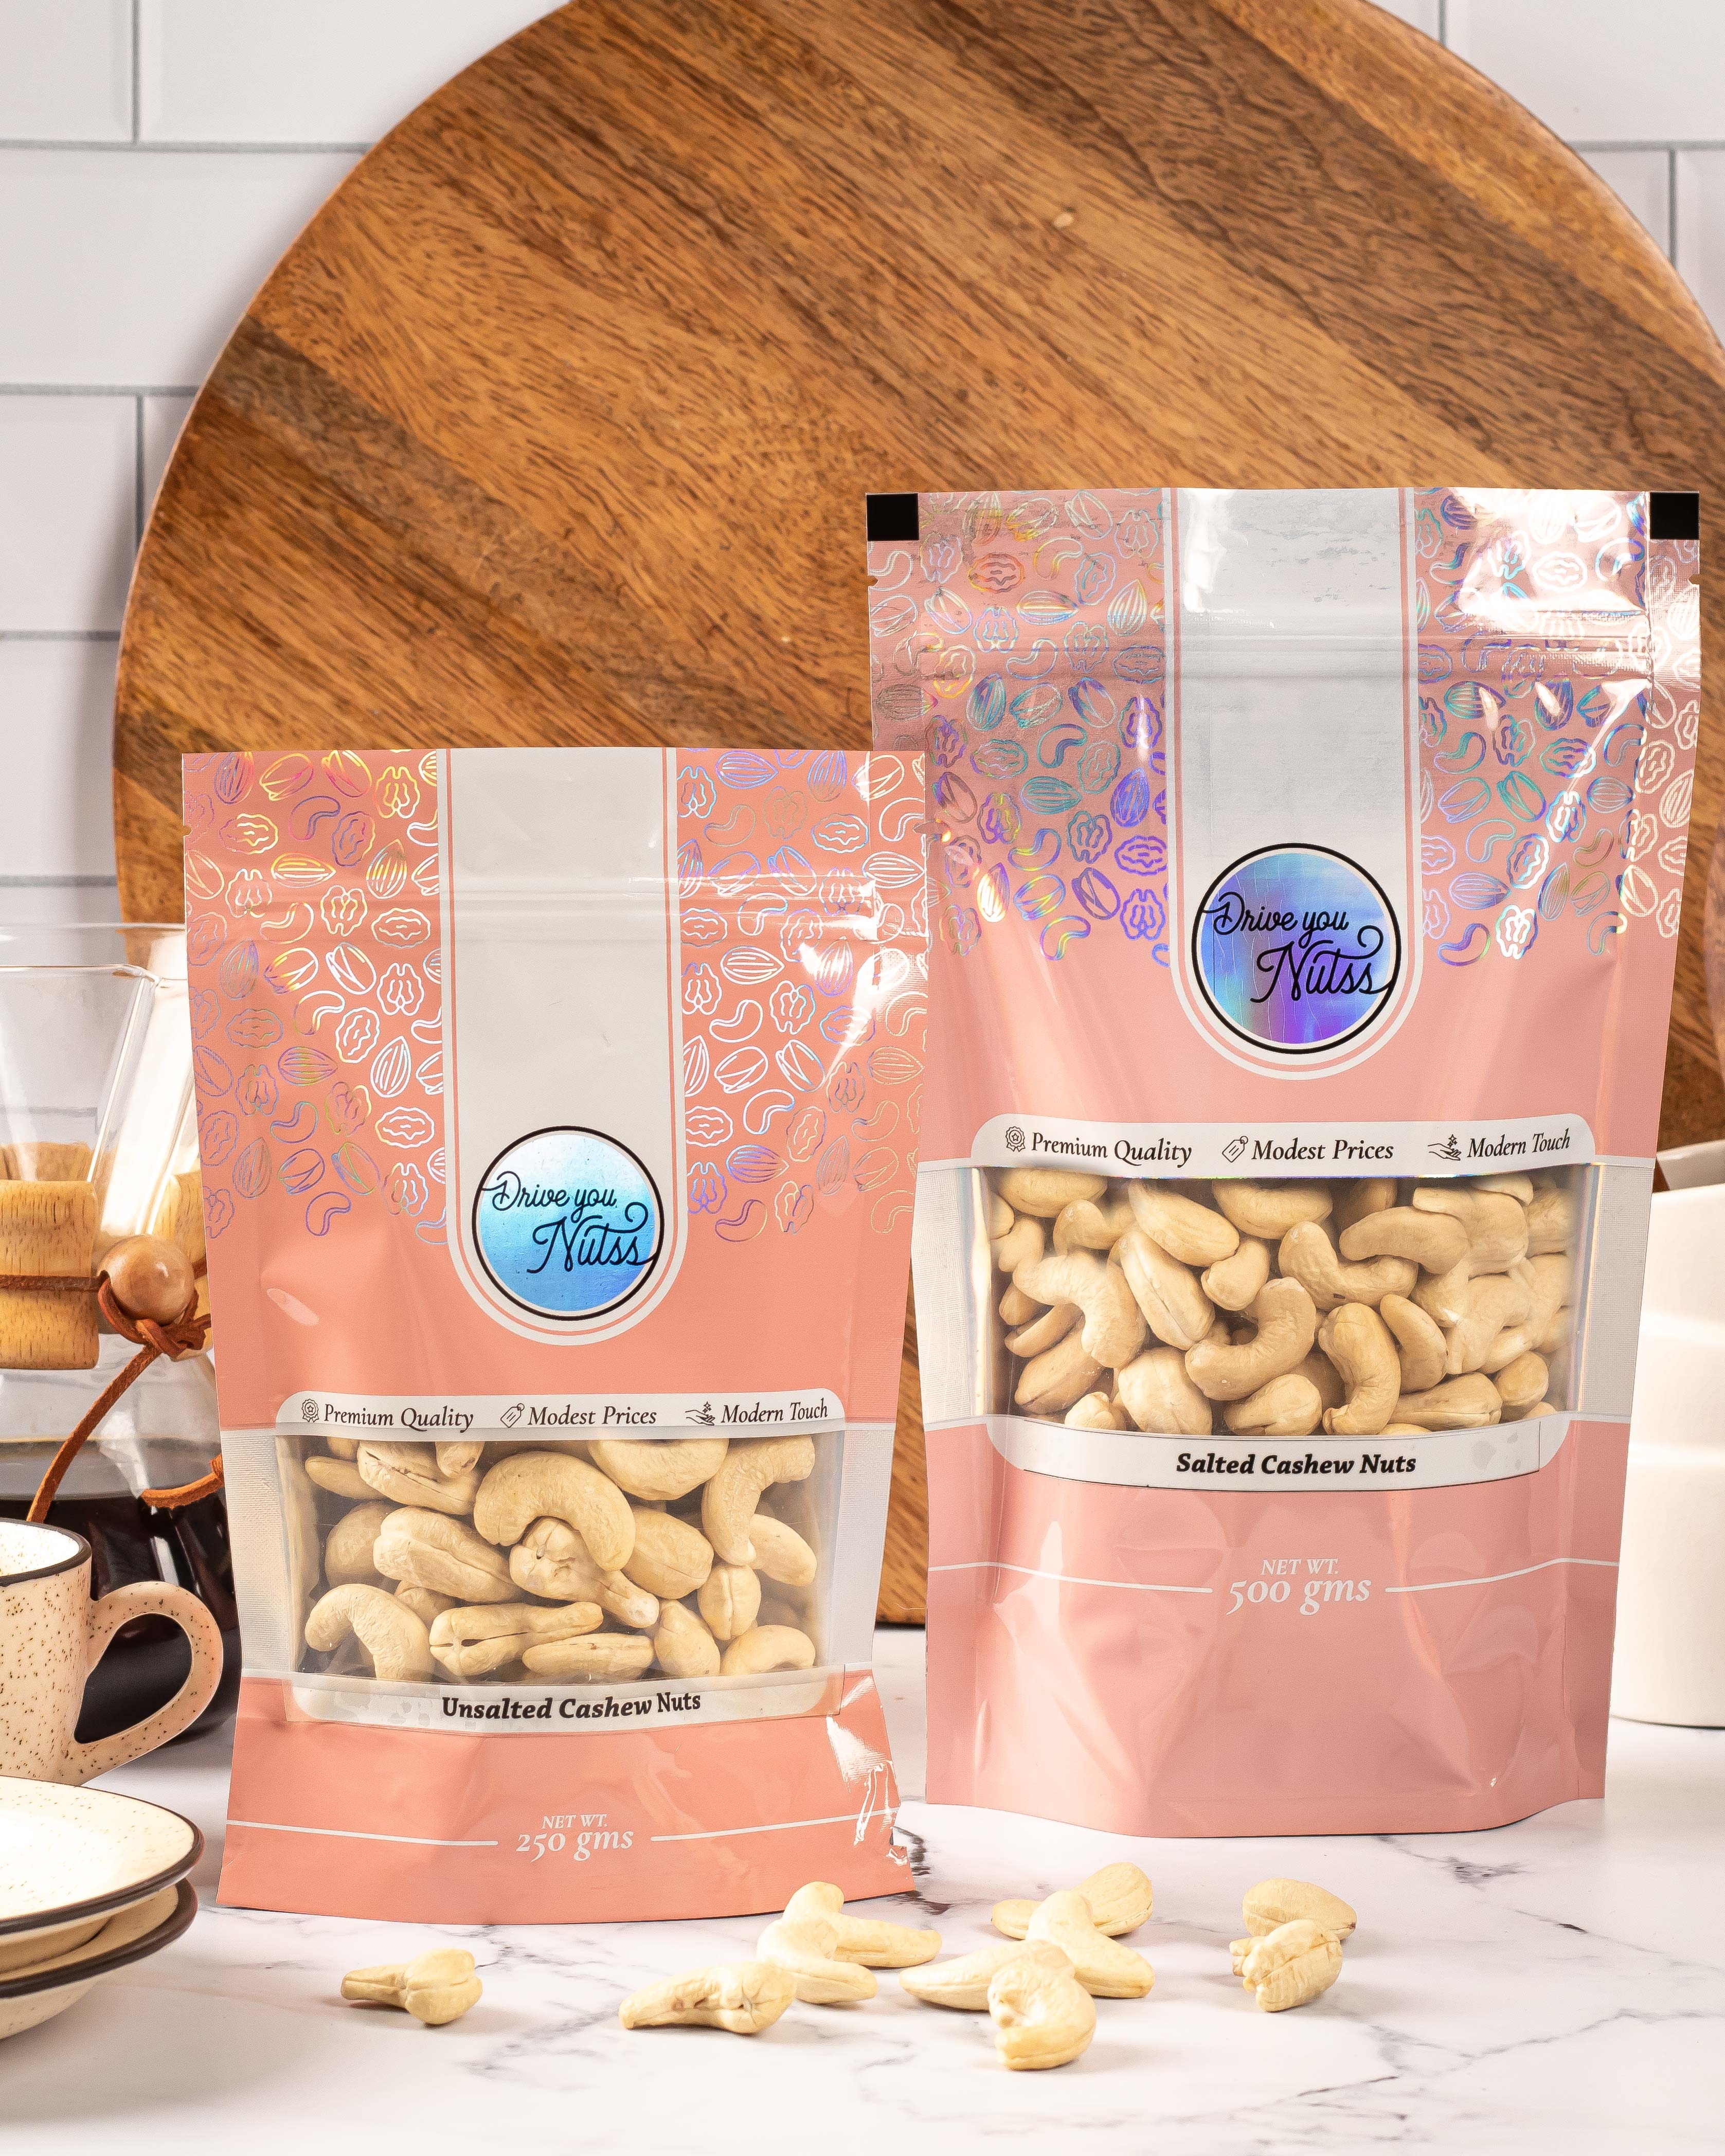 Unsalted Cashew Nuts (500 Gms)